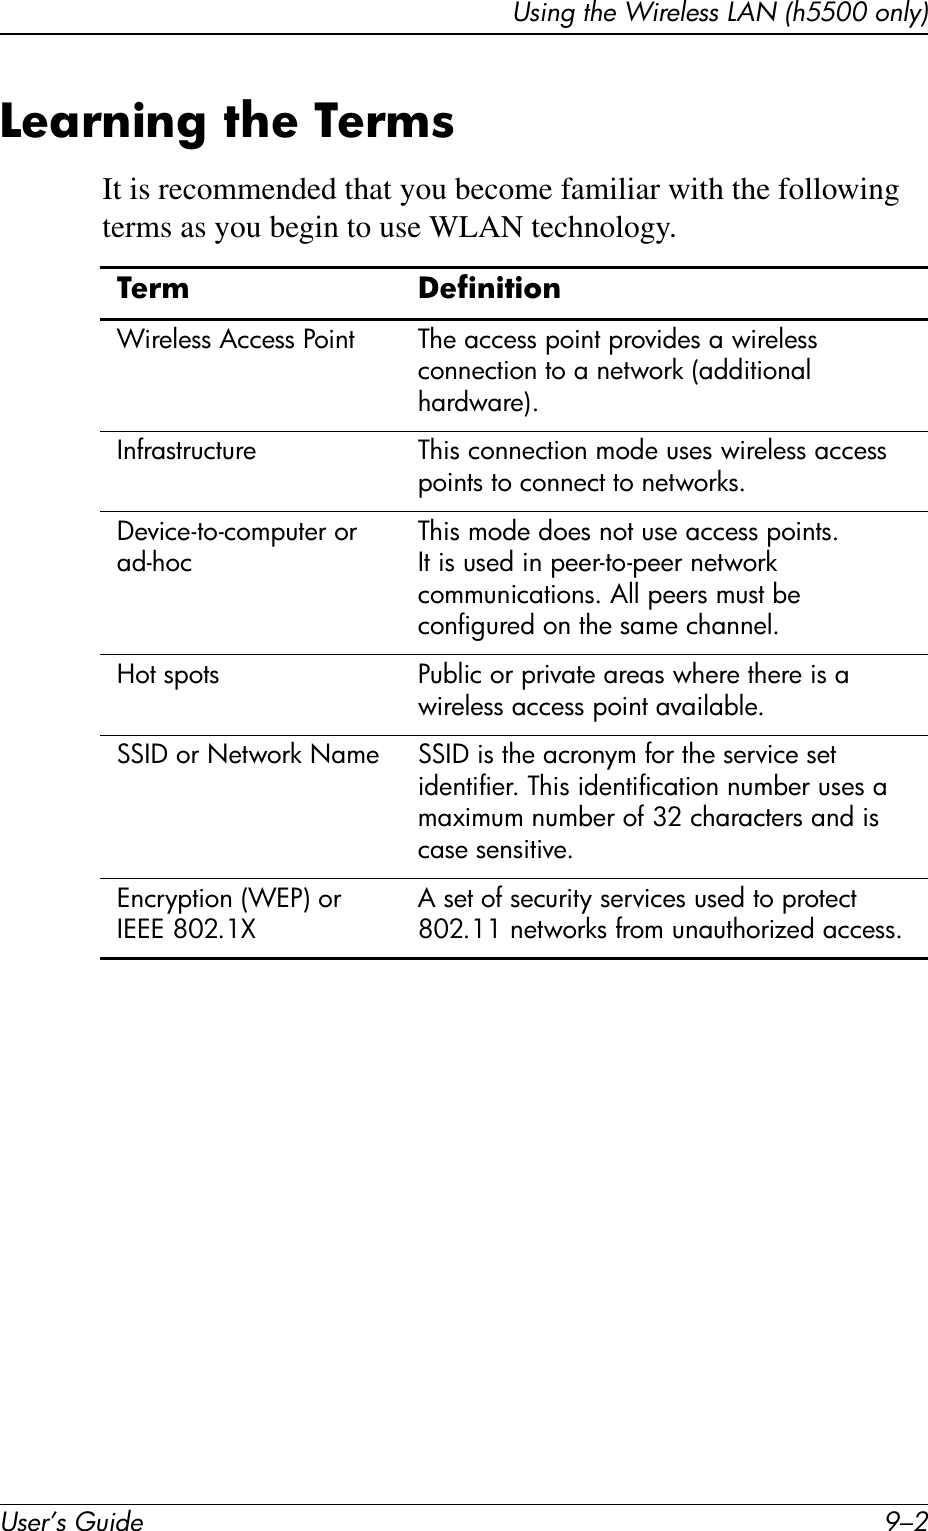 User’s Guide 9–2Using the Wireless LAN (h5500 only)Learning the TermsIt is recommended that you become familiar with the following terms as you begin to use WLAN technology.Term DefinitionWireless Access Point The access point provides a wireless connection to a network (additional hardware).Infrastructure This connection mode uses wireless access points to connect to networks.Device-to-computer or ad-hocThis mode does not use access points. It is used in peer-to-peer network communications. All peers must be configured on the same channel.Hot spots Public or private areas where there is a wireless access point available.SSID or Network Name SSID is the acronym for the service set identifier. This identification number uses a maximum number of 32 characters and is case sensitive.Encryption (WEP) or IEEE 802.1XA set of security services used to protect 802.11 networks from unauthorized access.